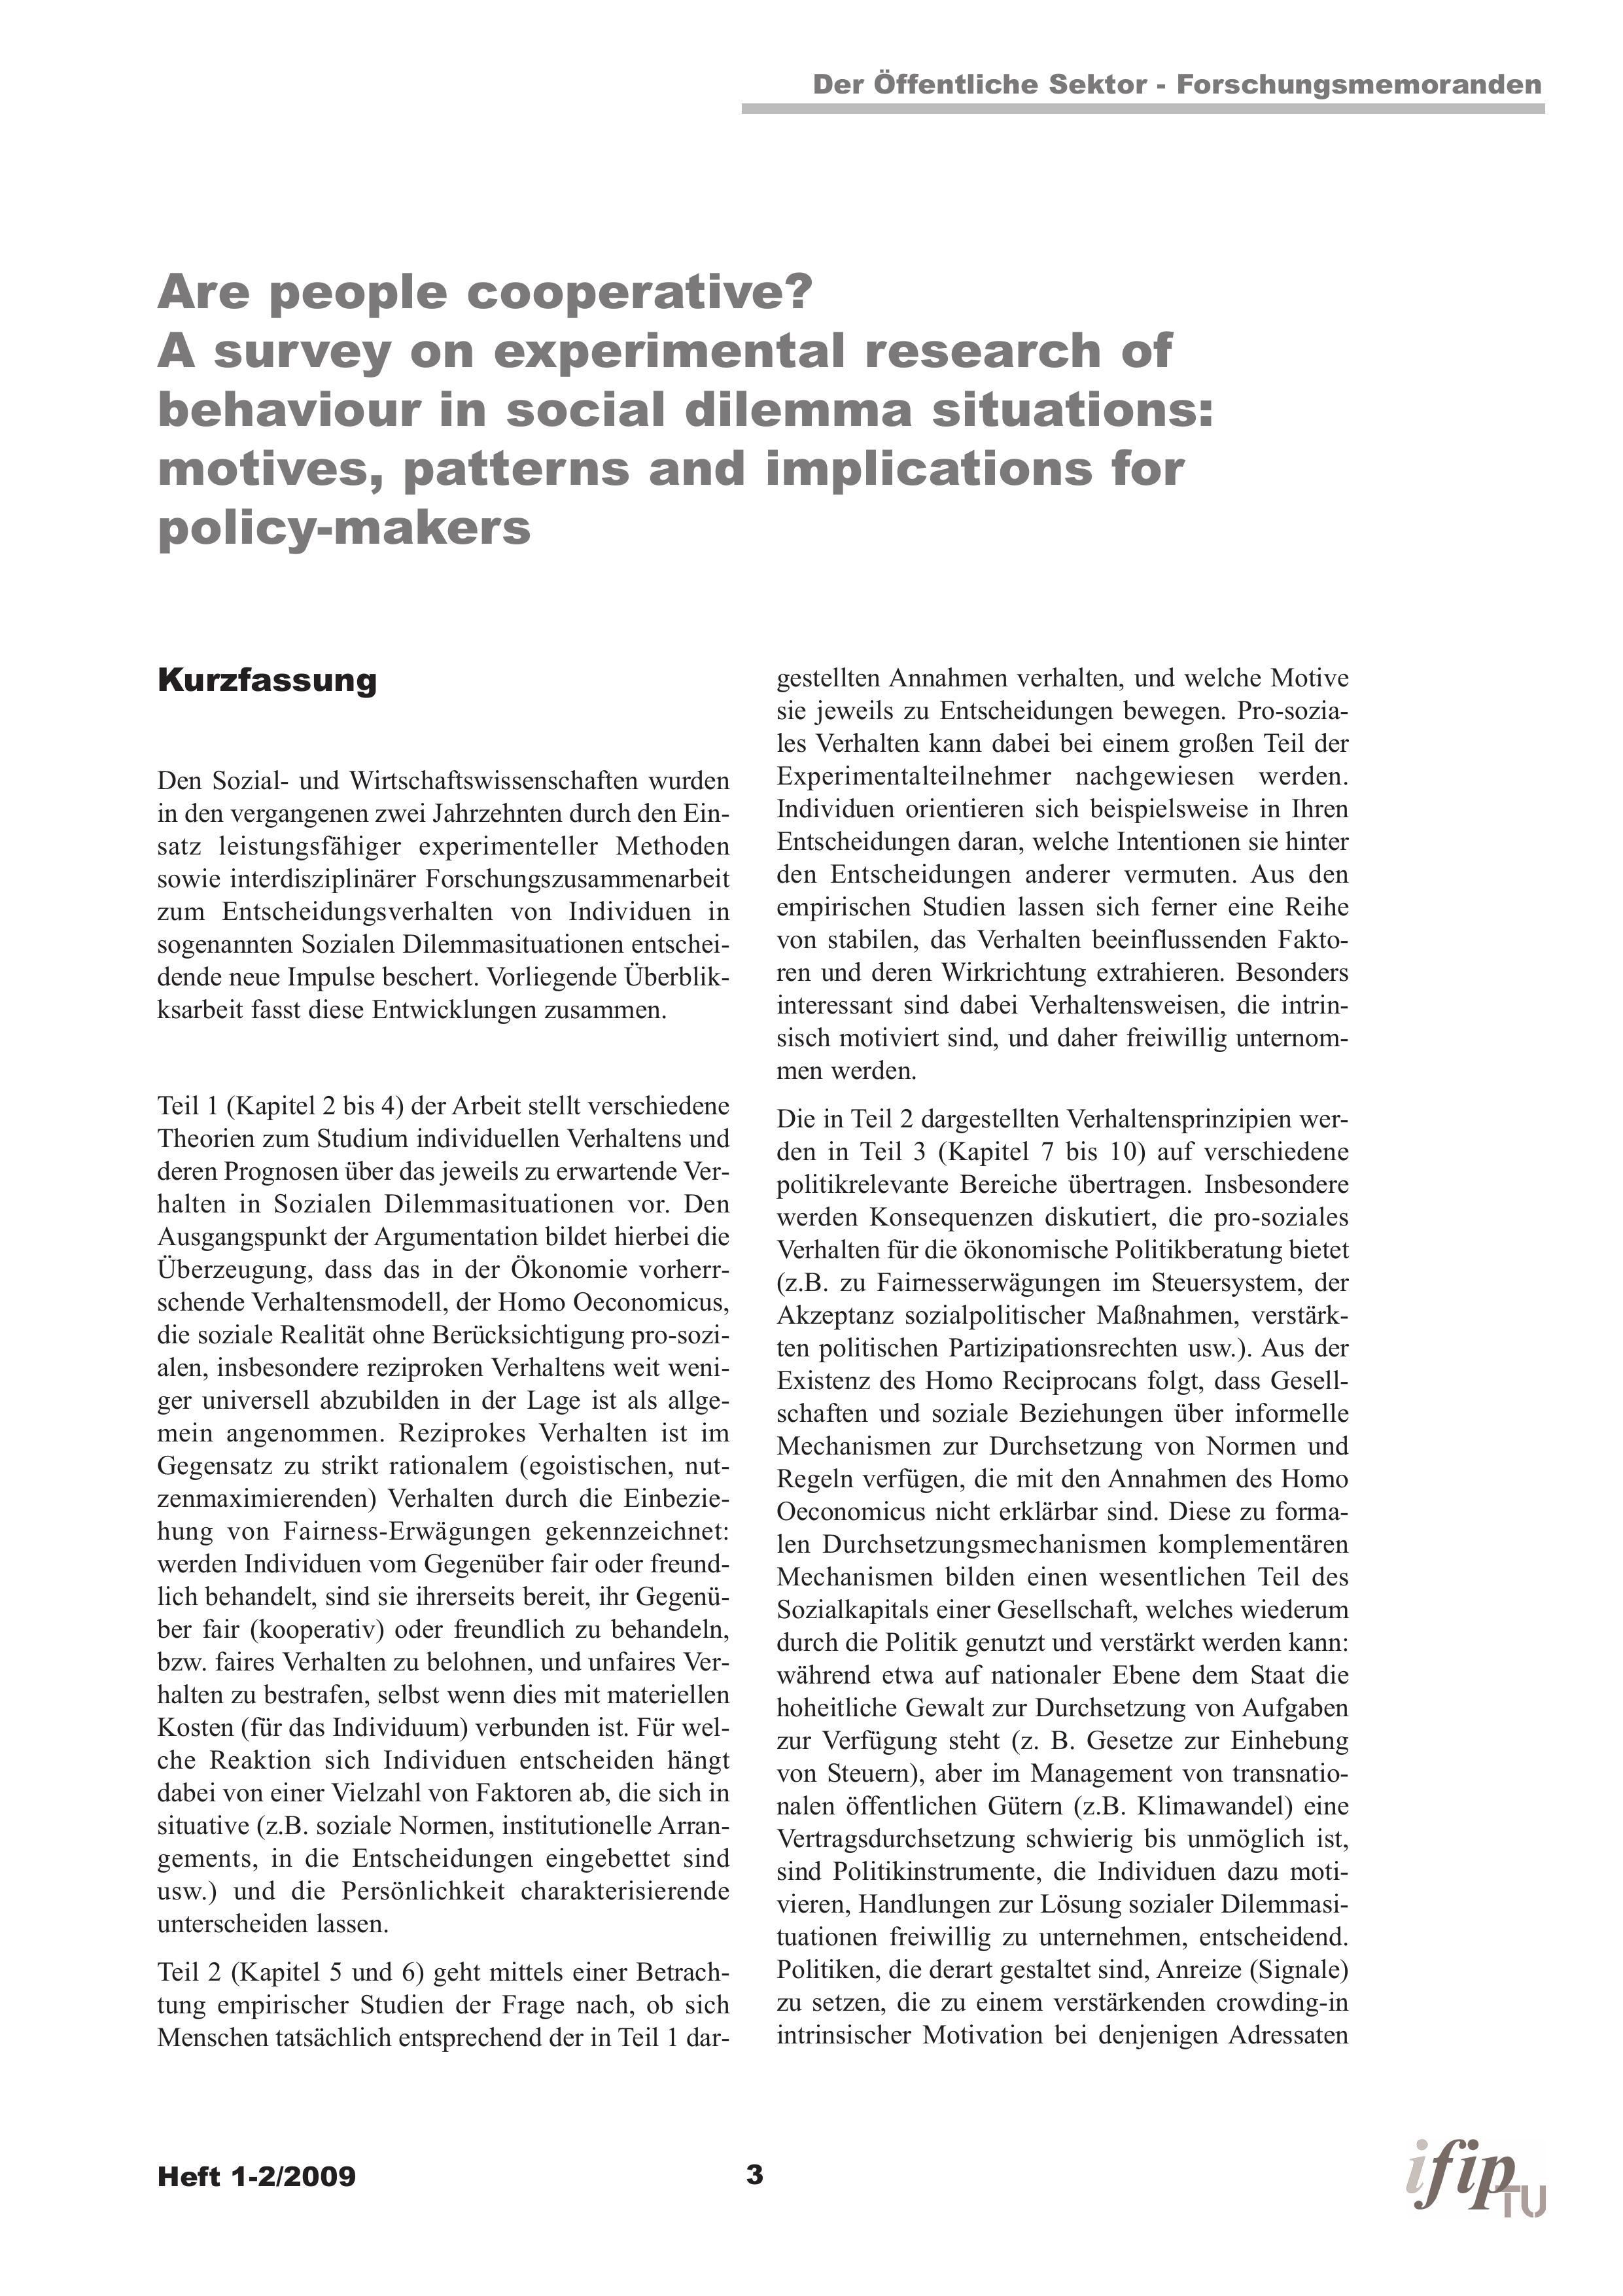 Are people cooperative? A survey on experimental research of behaviour in social dilemma situations: motives, patterns and implications for policy-makers